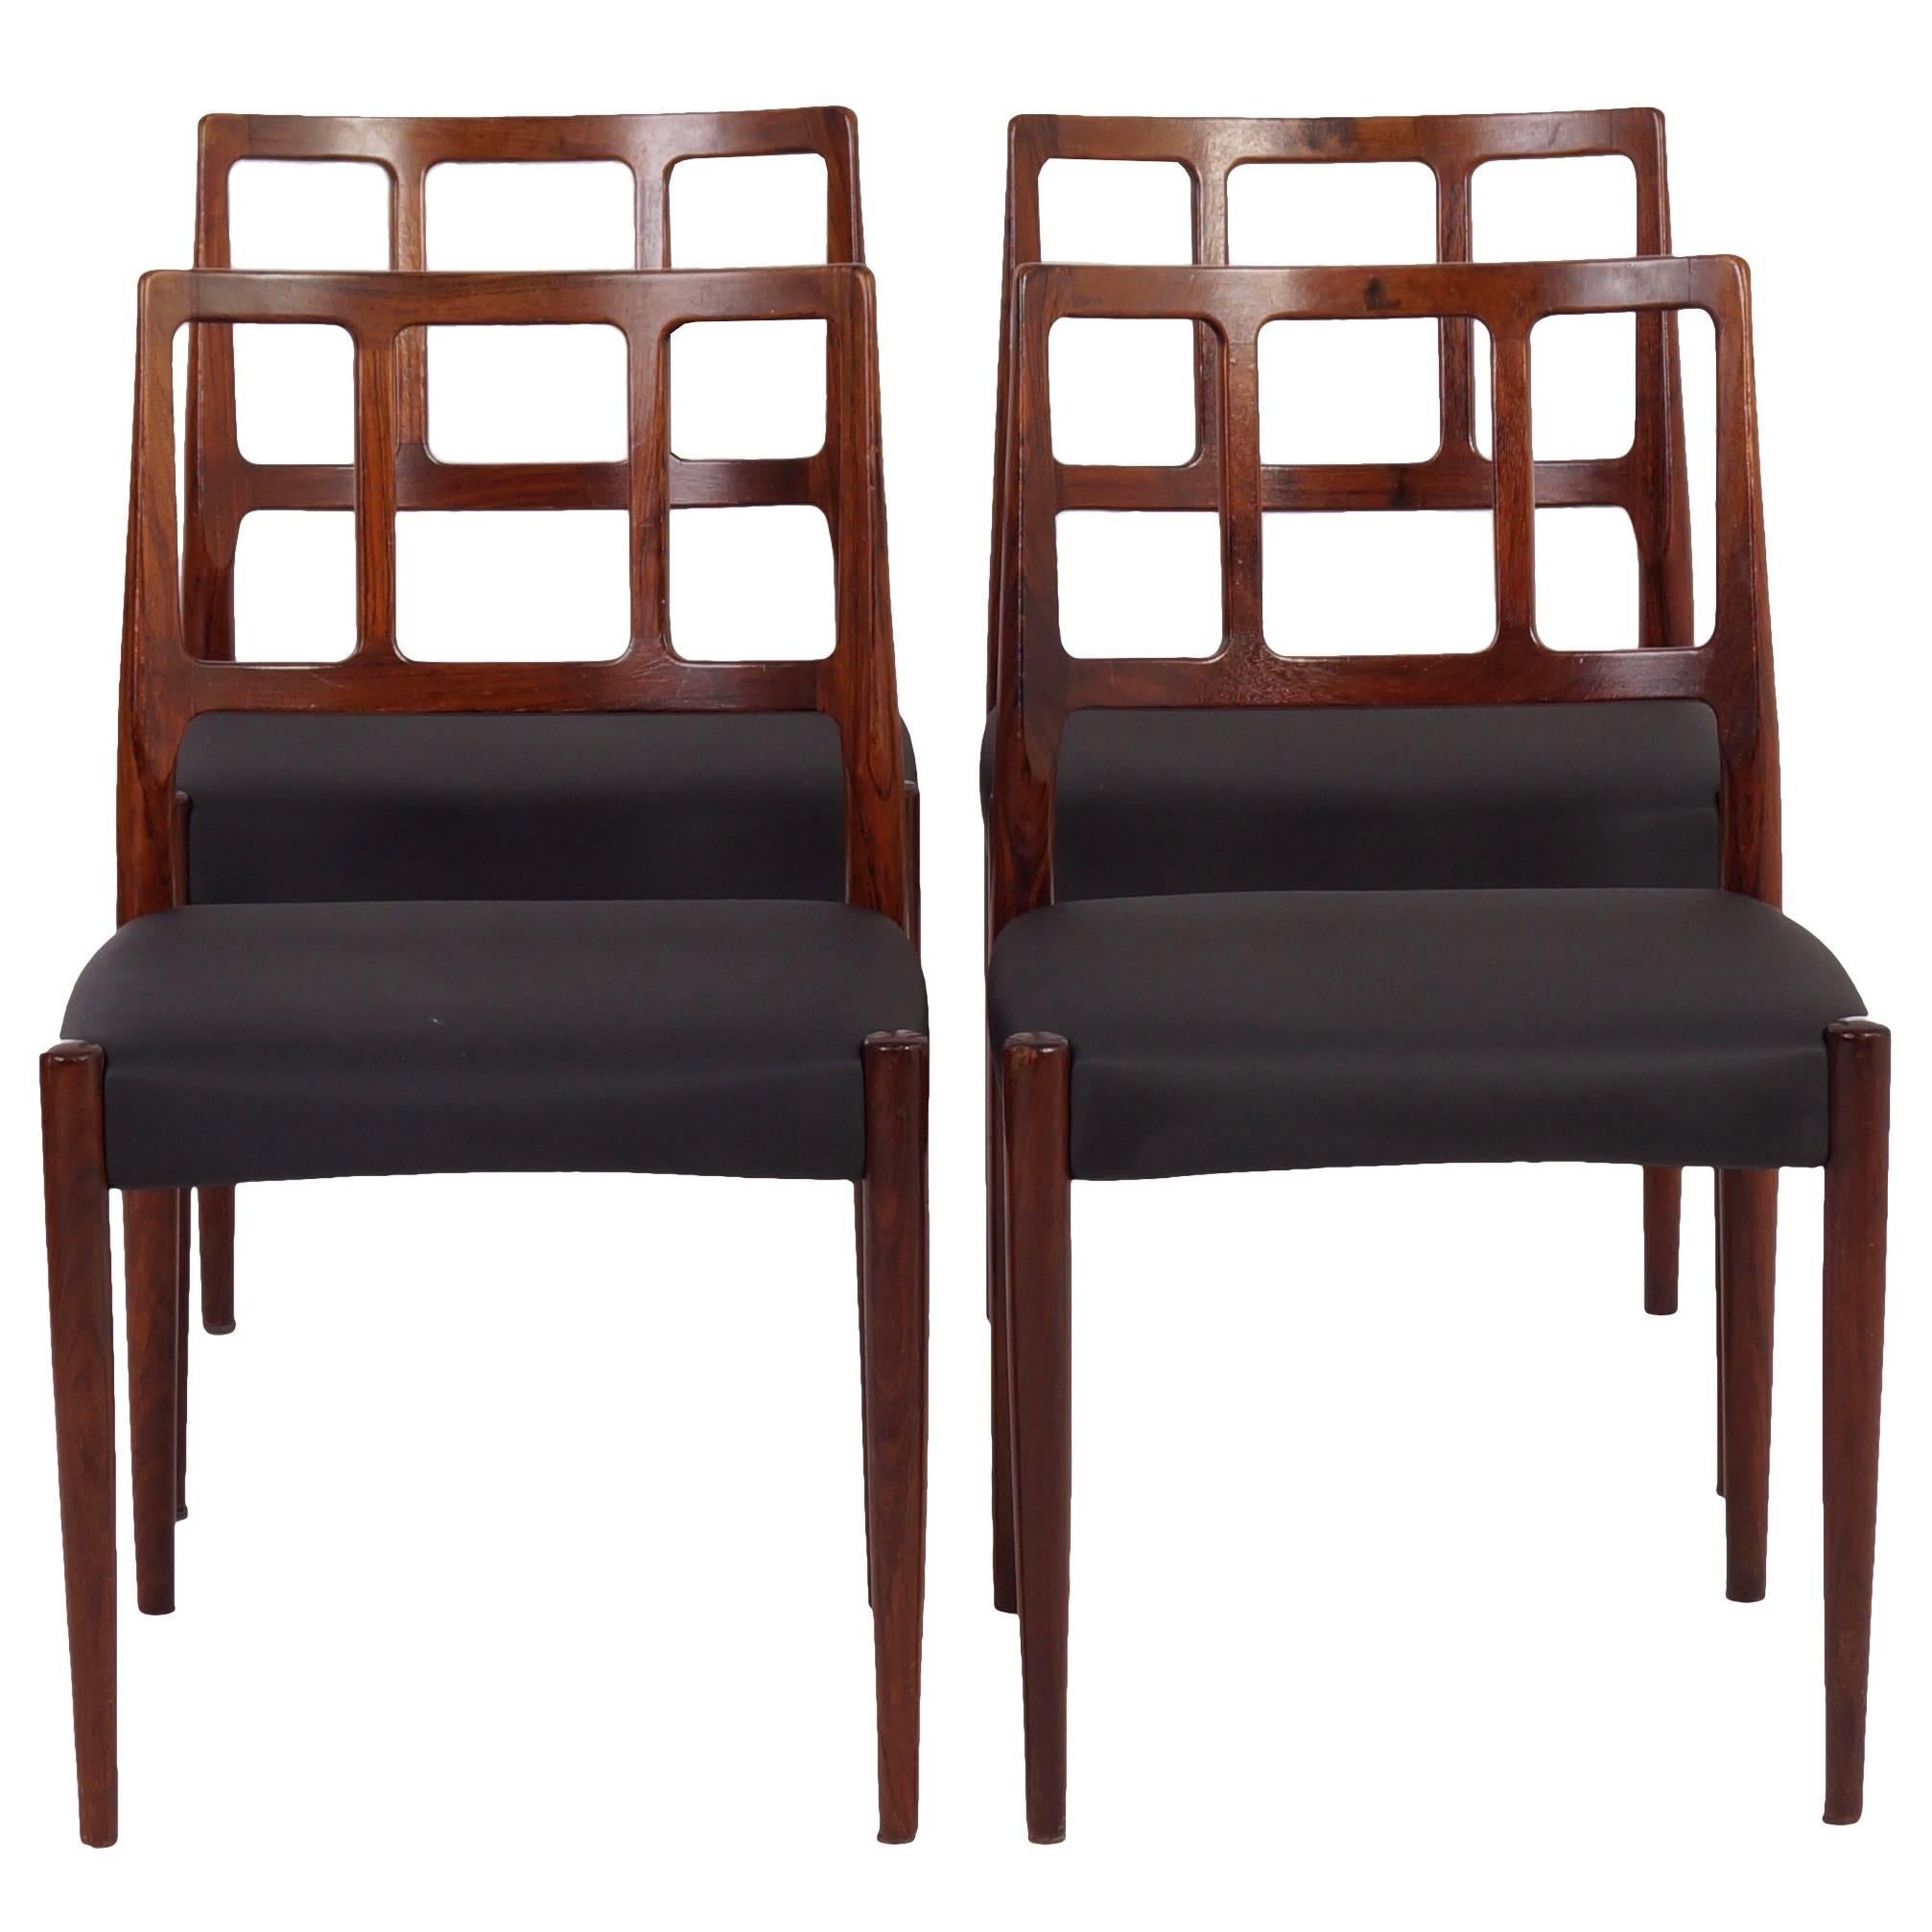 Set of Dining Chairs by Johannes Andersen for Uldum Møbelfabrik, 1960s For Sale